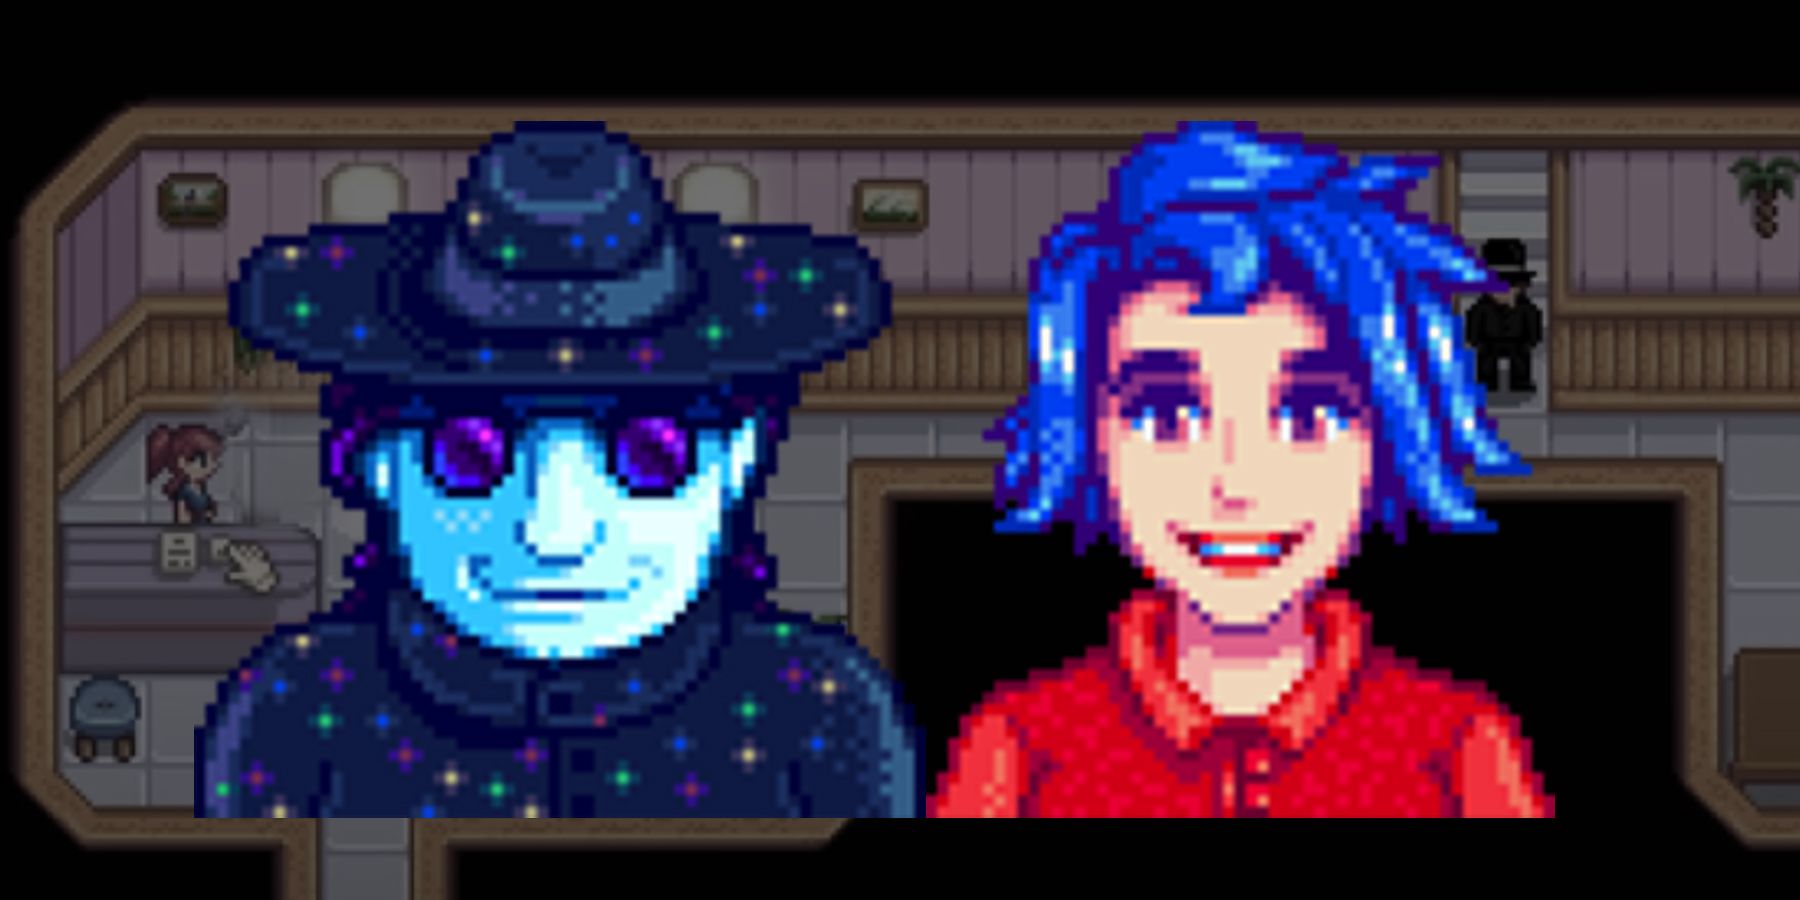 Mr Qi and Emily, Sandy's closest contacts in Stardew Valley